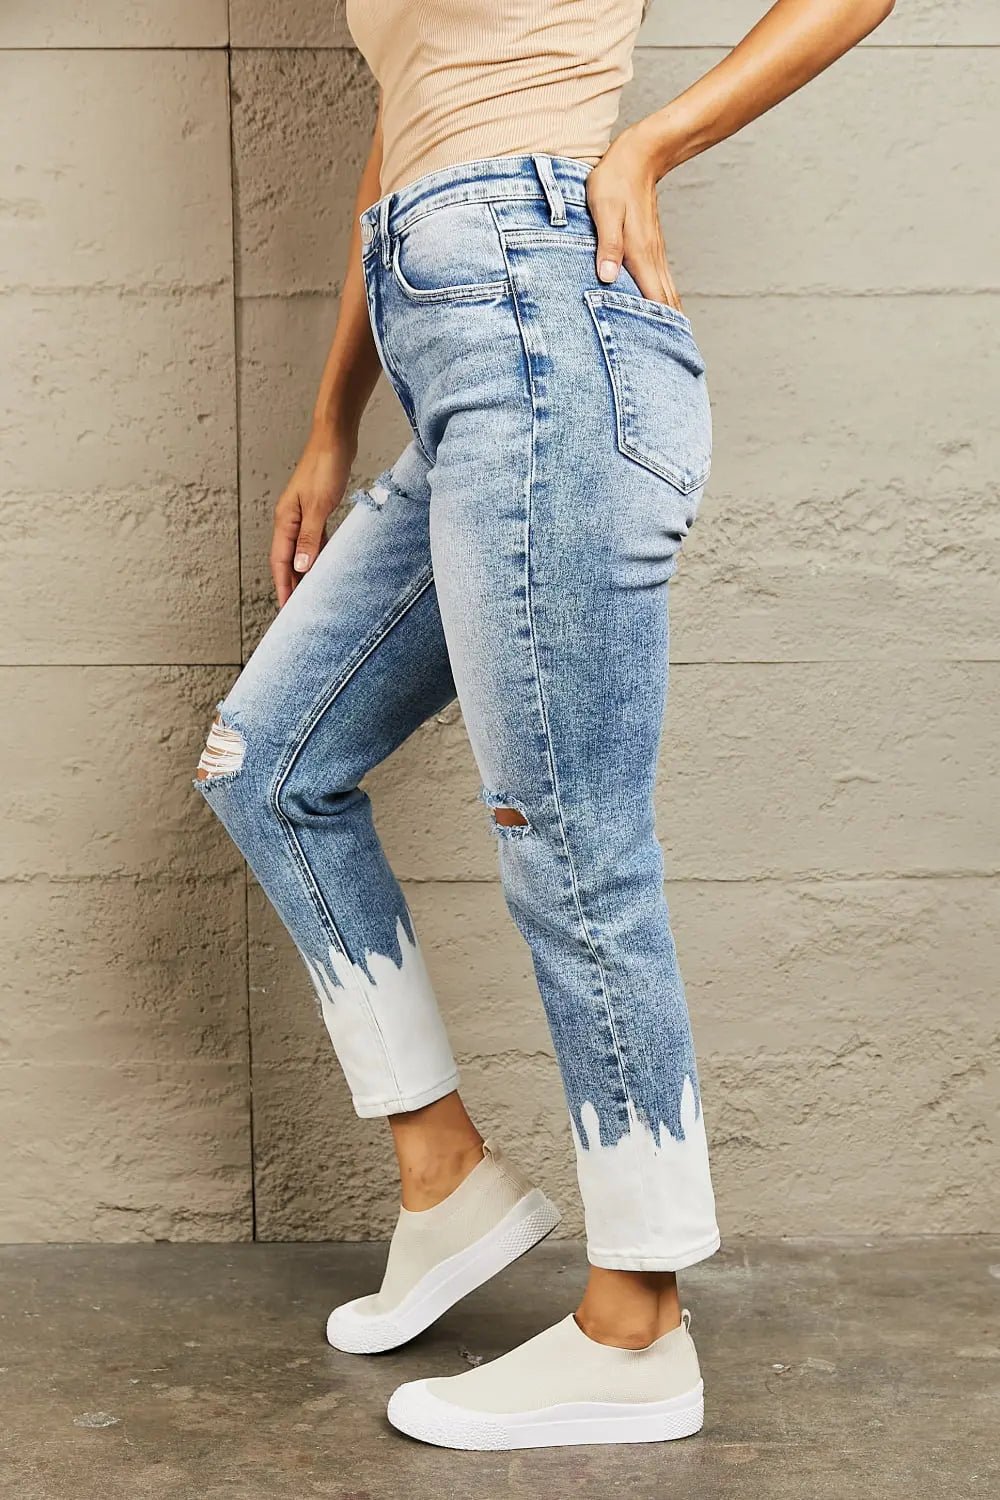 HIGH WAIST CROPPED PAINTED DENIM JEANS FOR WOMEN - MeadeuxHIGH WAIST CROPPED PAINTED DENIM JEANS FOR WOMENJeansMeadeux